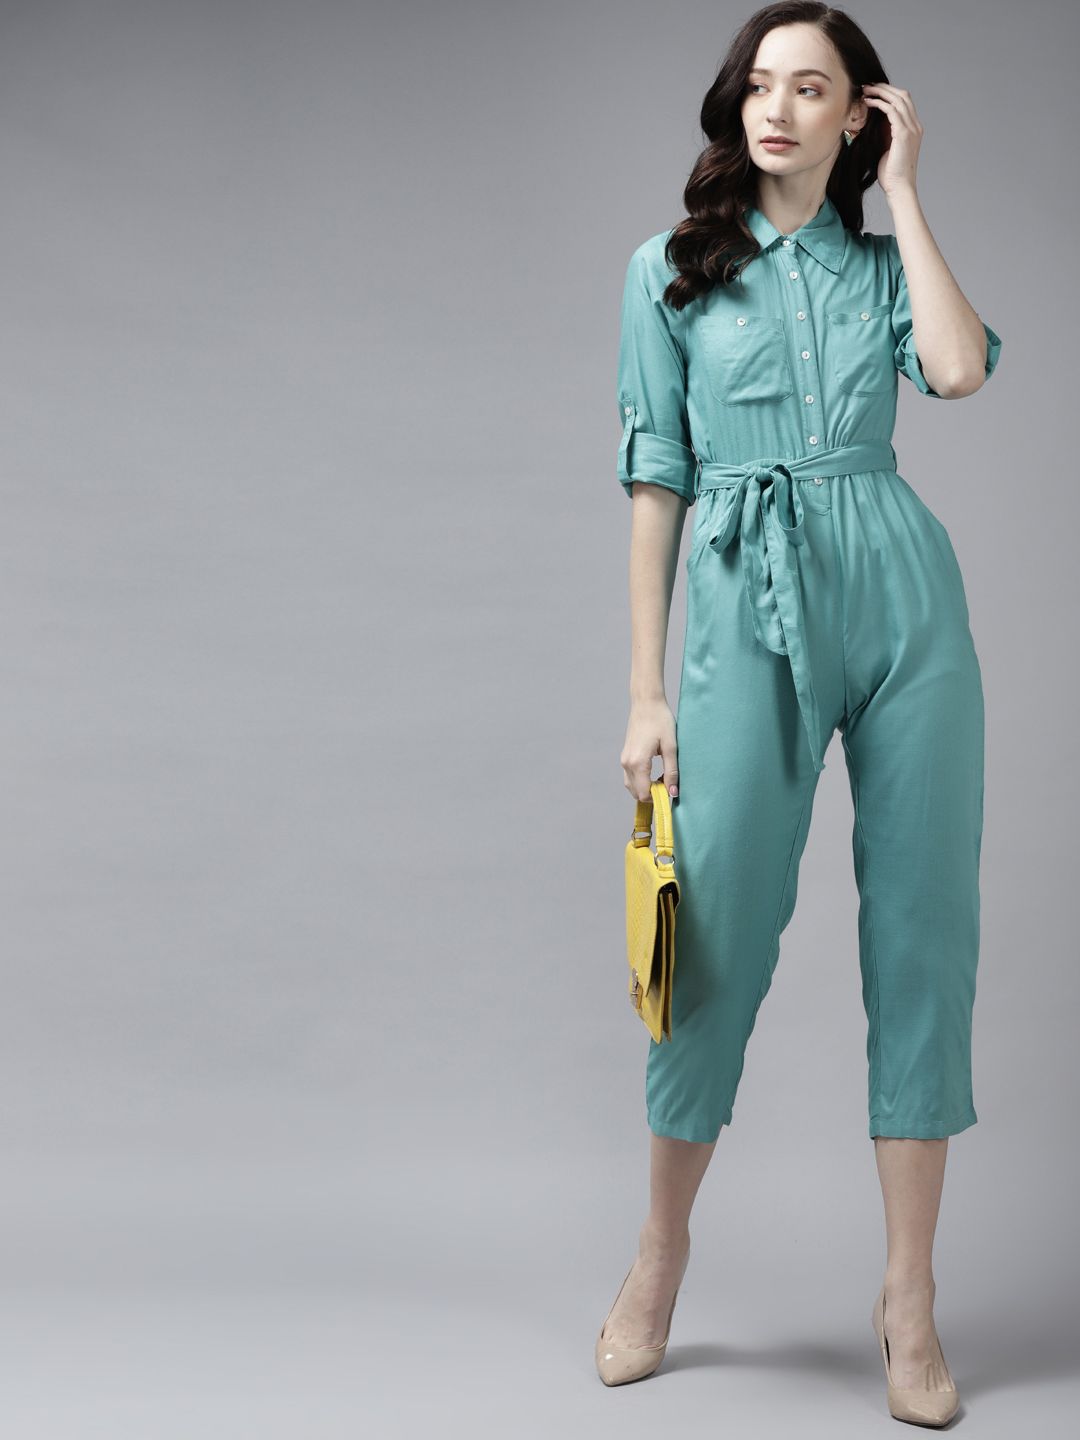 The Dry State Turquoise Blue Shirt Collar Basic Jumpsuit Price in India